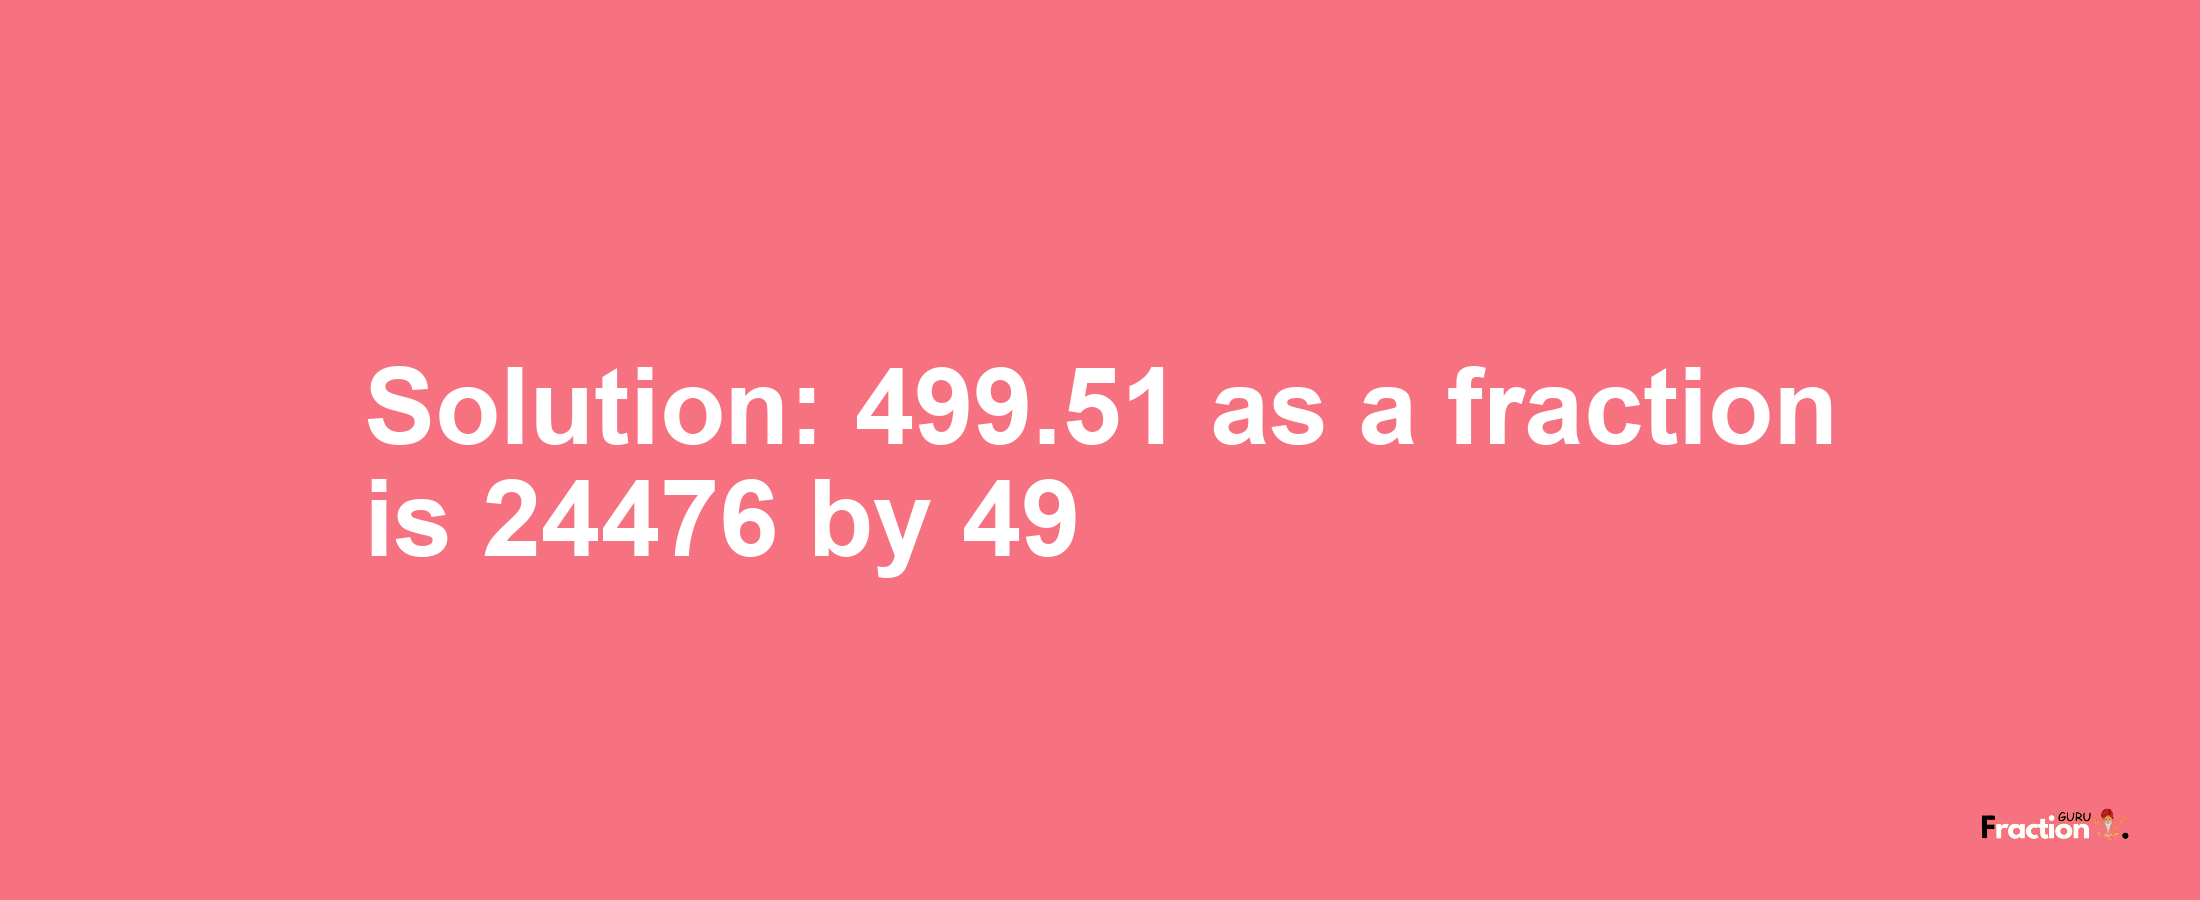 Solution:499.51 as a fraction is 24476/49